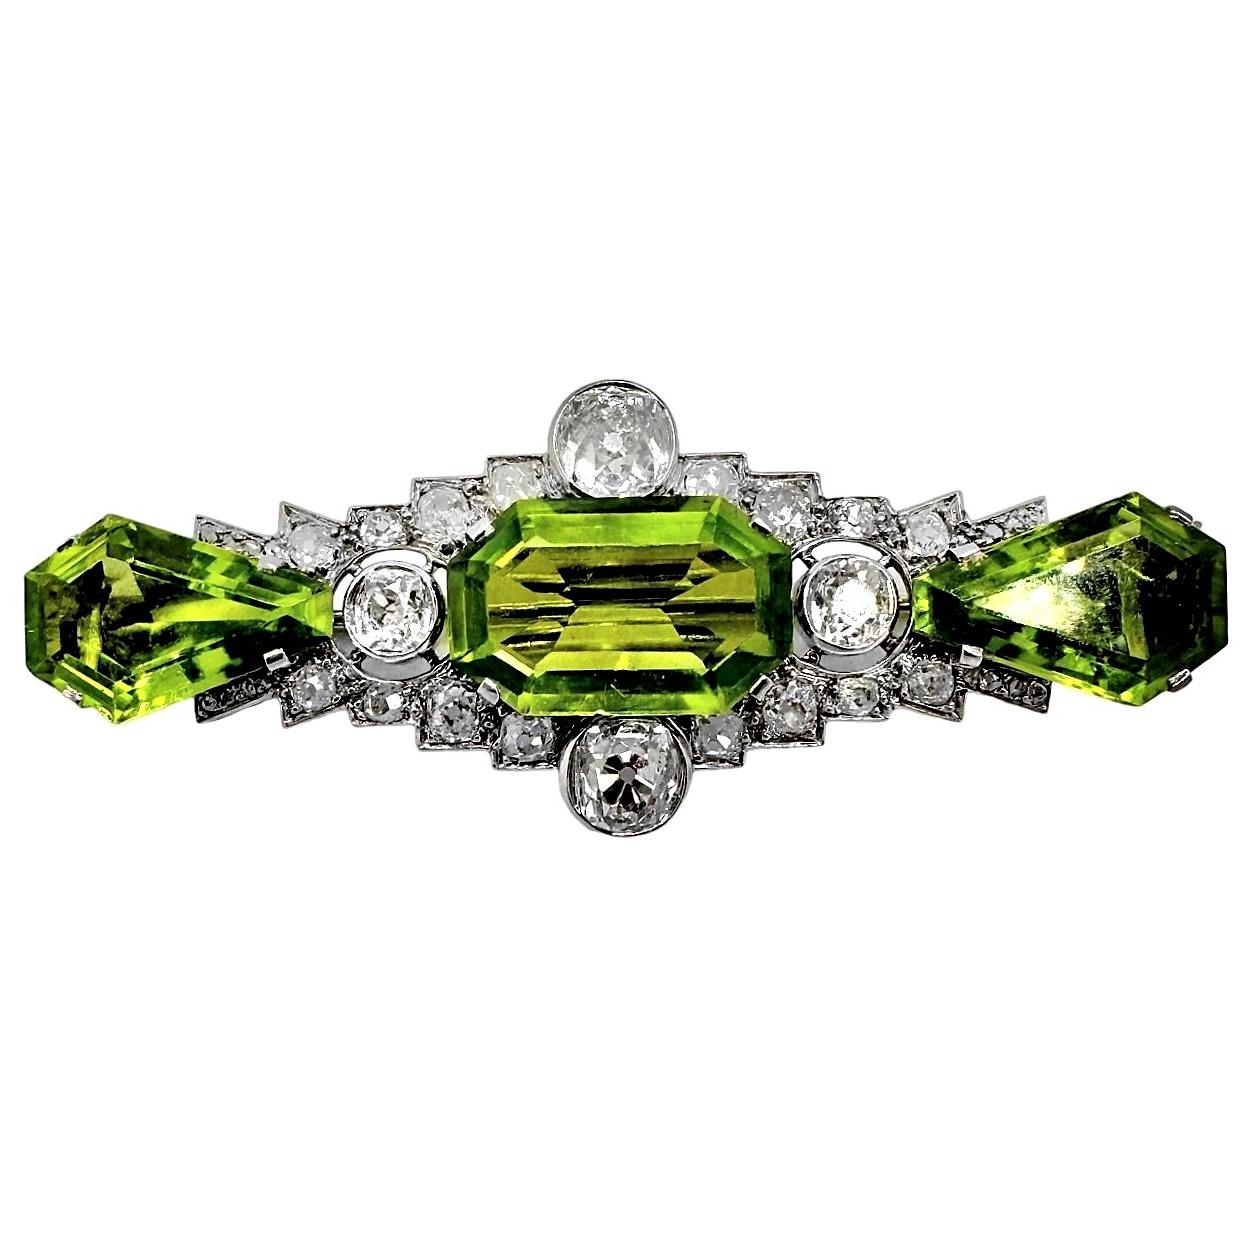 A spectacular early twentieth century brooch centered around an emerald cut peridot, surrounded by diamonds, and finished on either side with shield cut peridot. The central stone weighs approximately 10.5ct, and the combined weight of the two